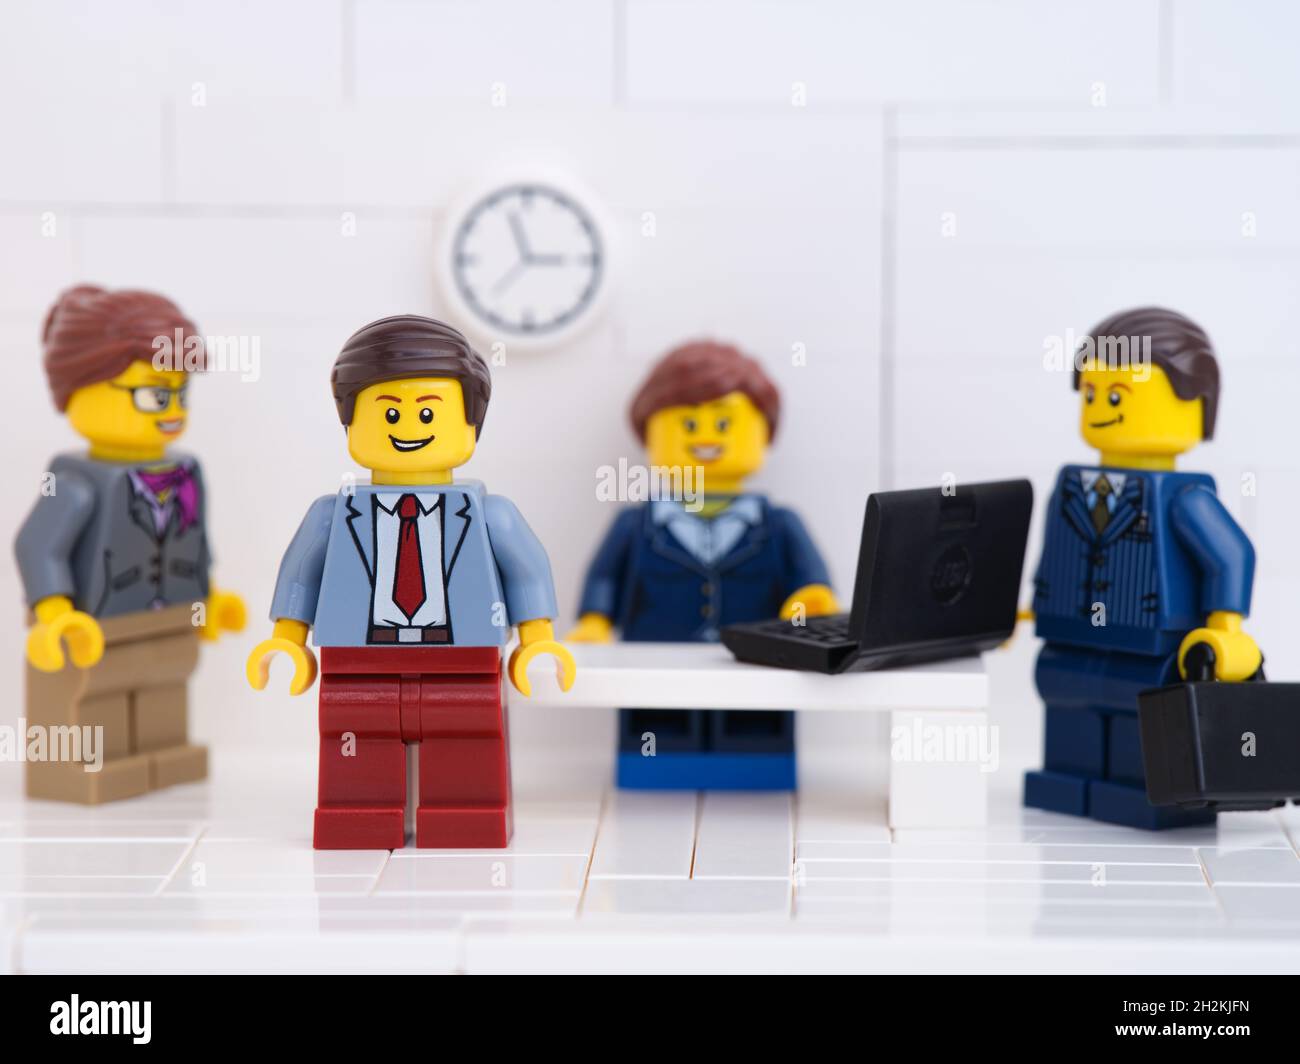 Tambov, Russian Federation - October 16, 2021 Lego business person minifigures working in their office. Stock Photo